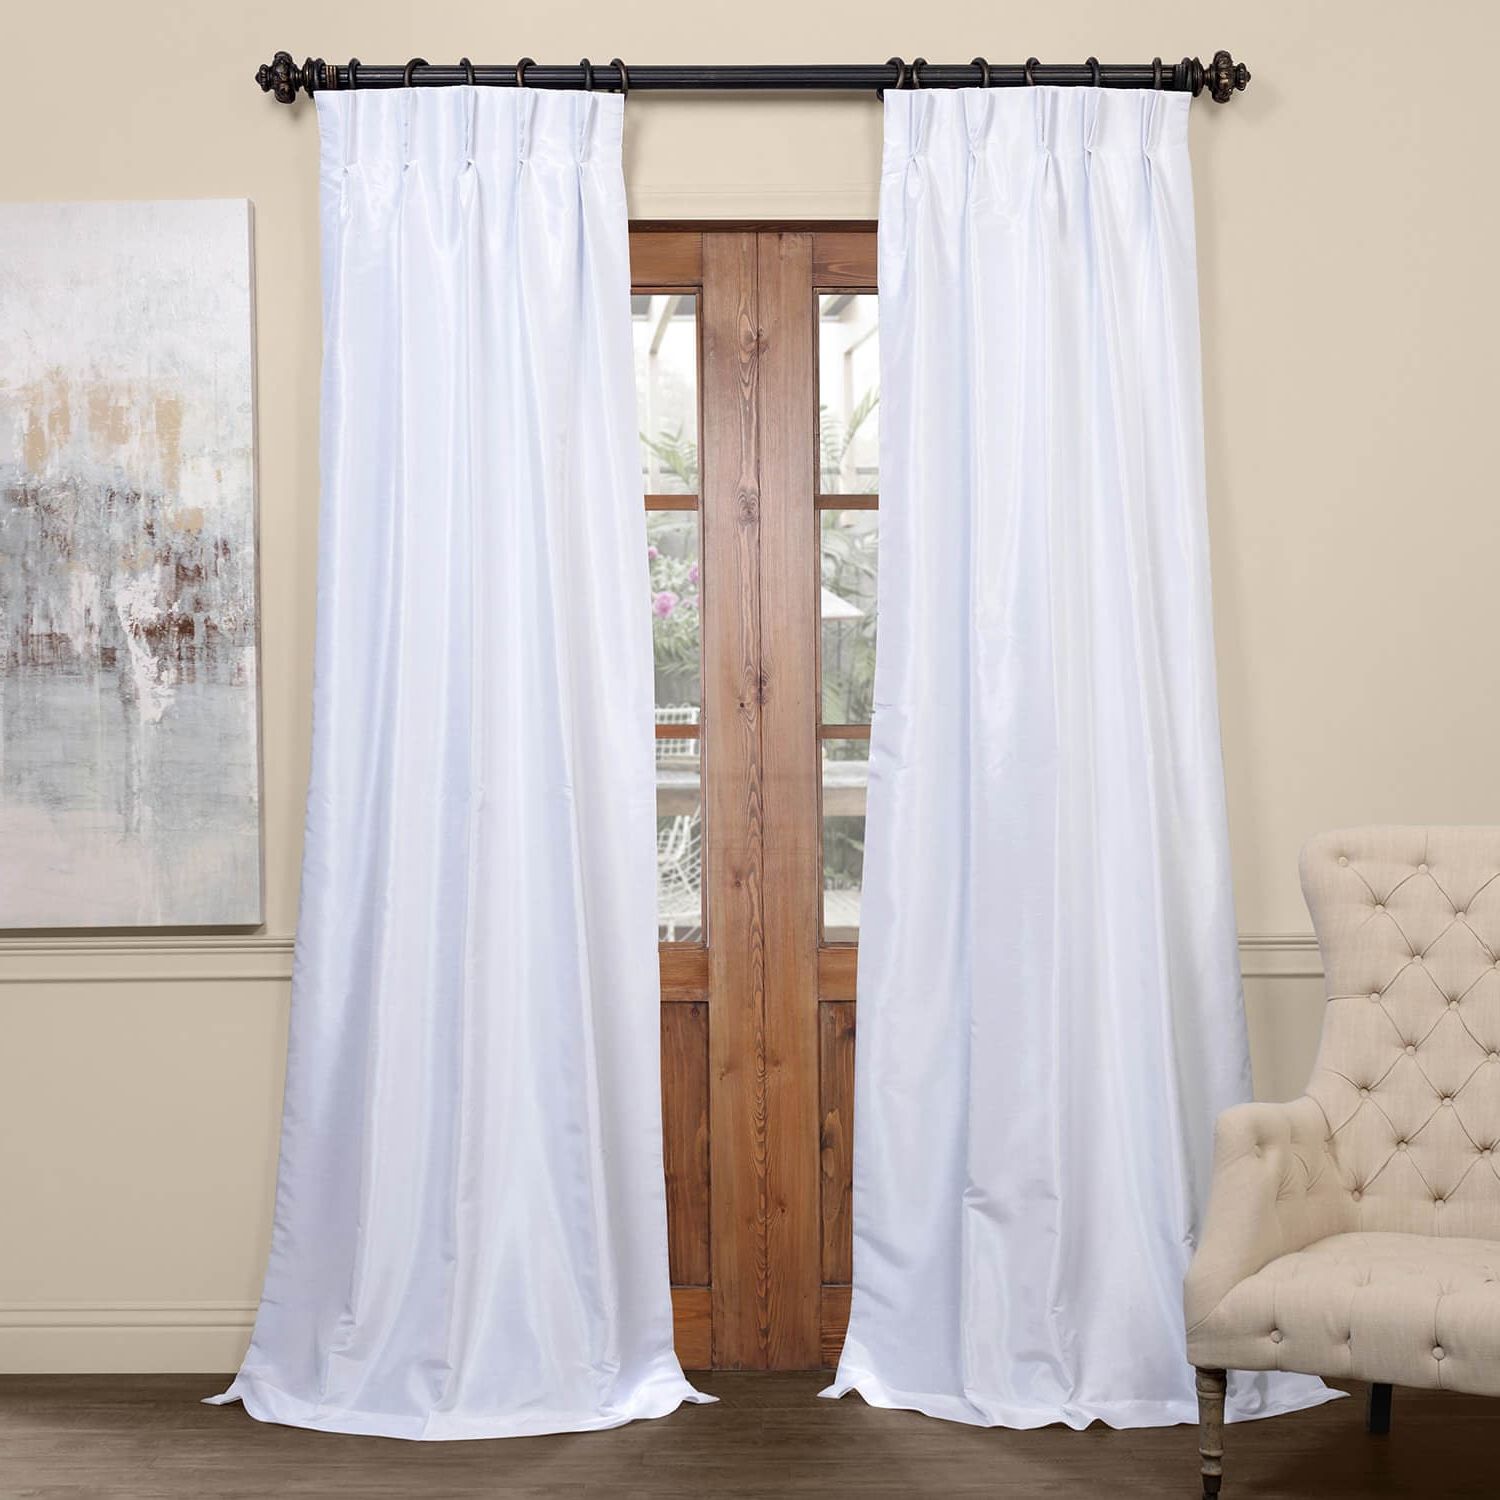 Ice Blackout Vintage Textured Faux Dupioni Pleated Curtain In Most Recent Ice White Vintage Faux Textured Silk Curtain Panels (View 9 of 20)